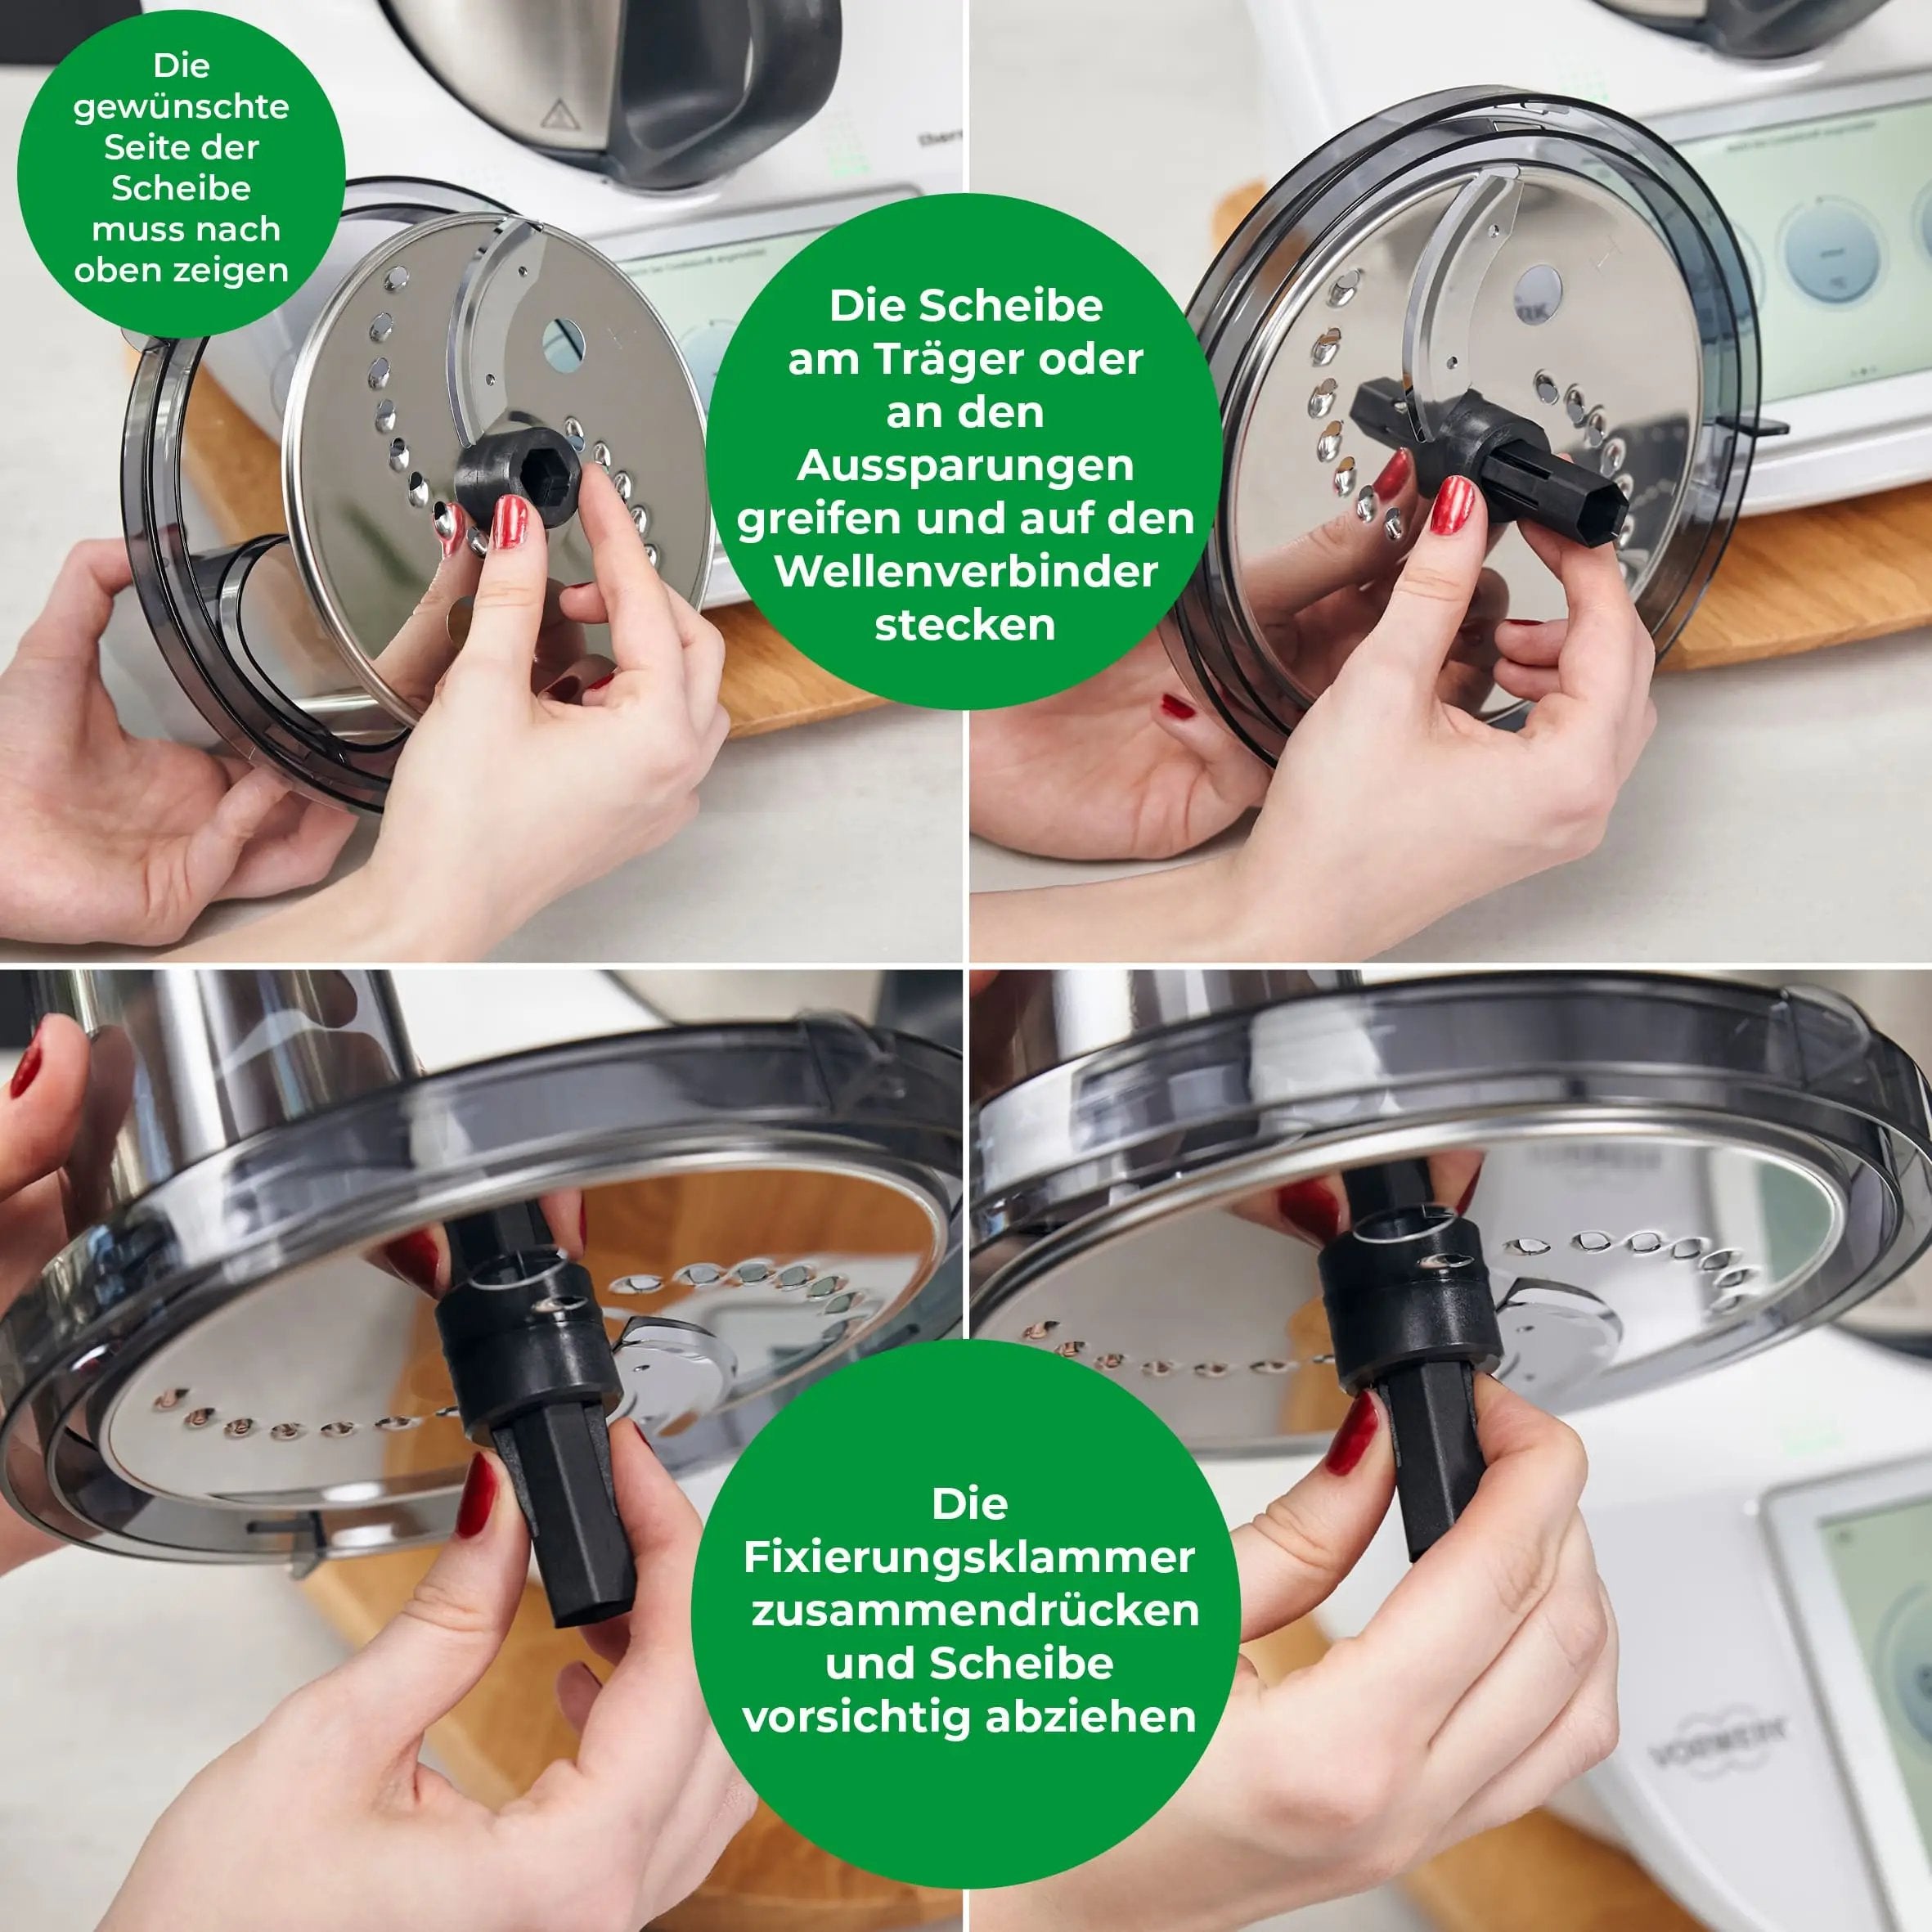 Repair Thermomix: main faults and solutions